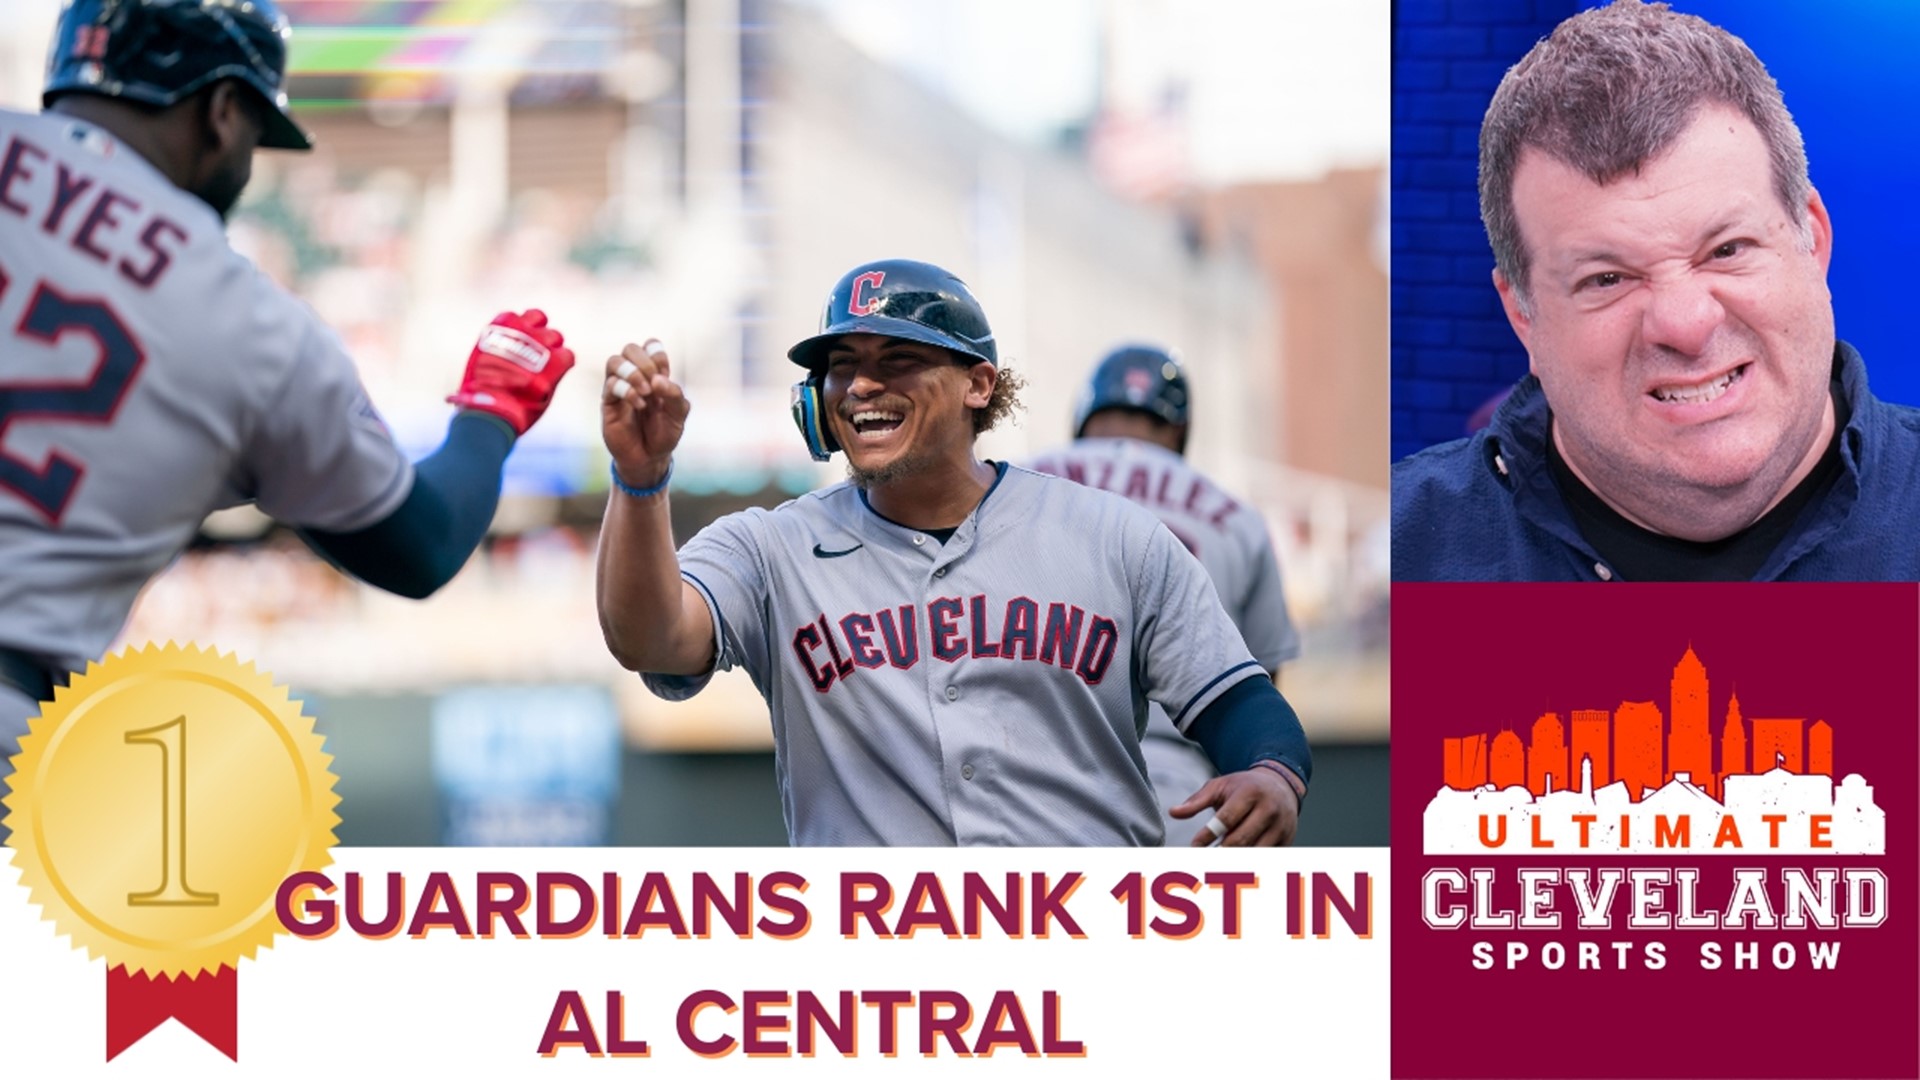 The guys react to the Cleveland Guardians winning against the Minnesota Twins game and place 1st in the AL Central.